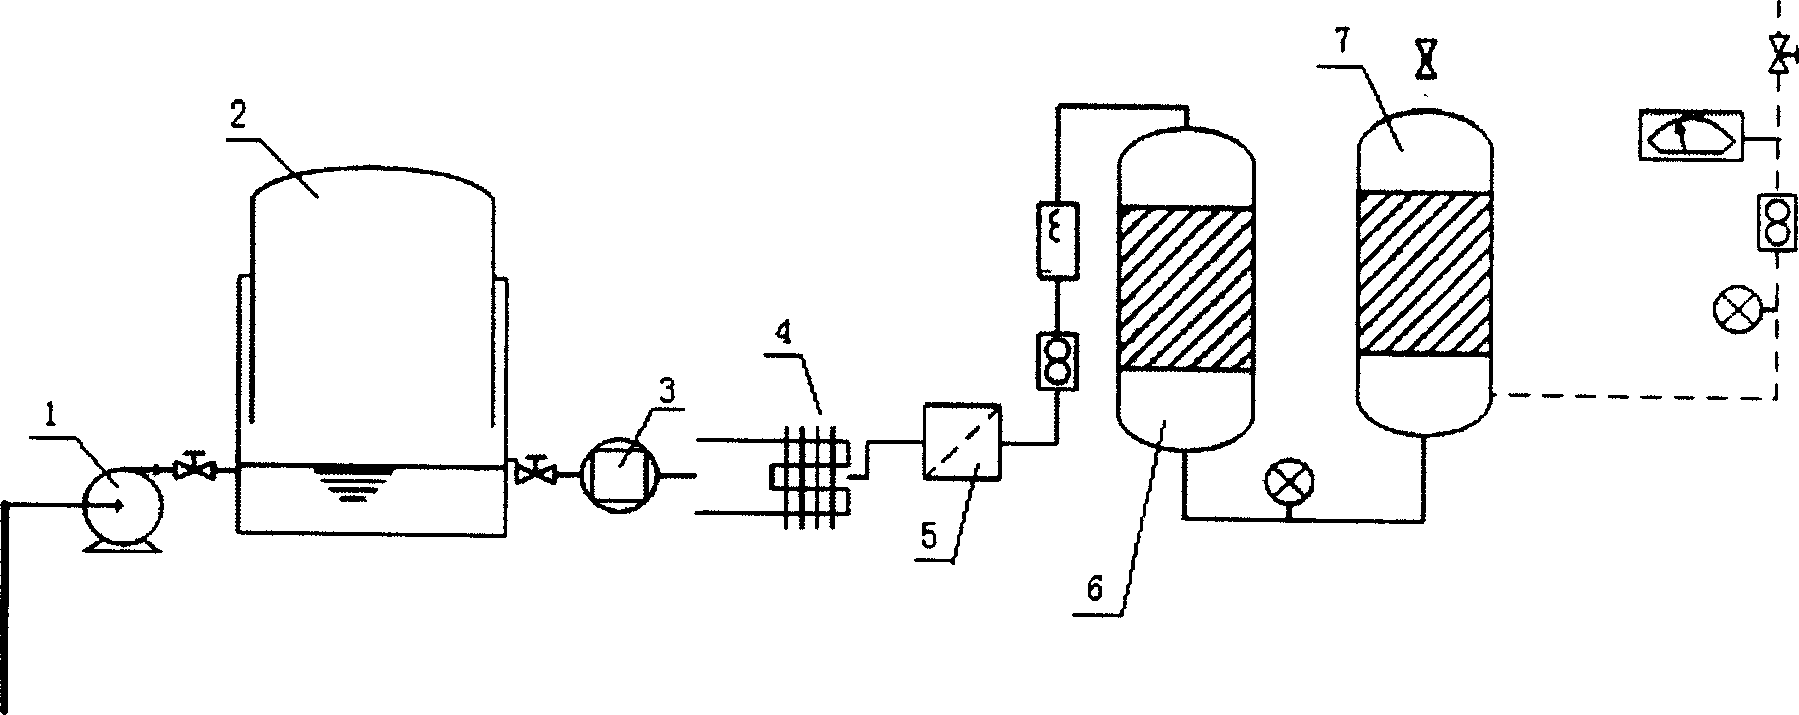 Production and apparatus for producing methane from refuse embedded gas